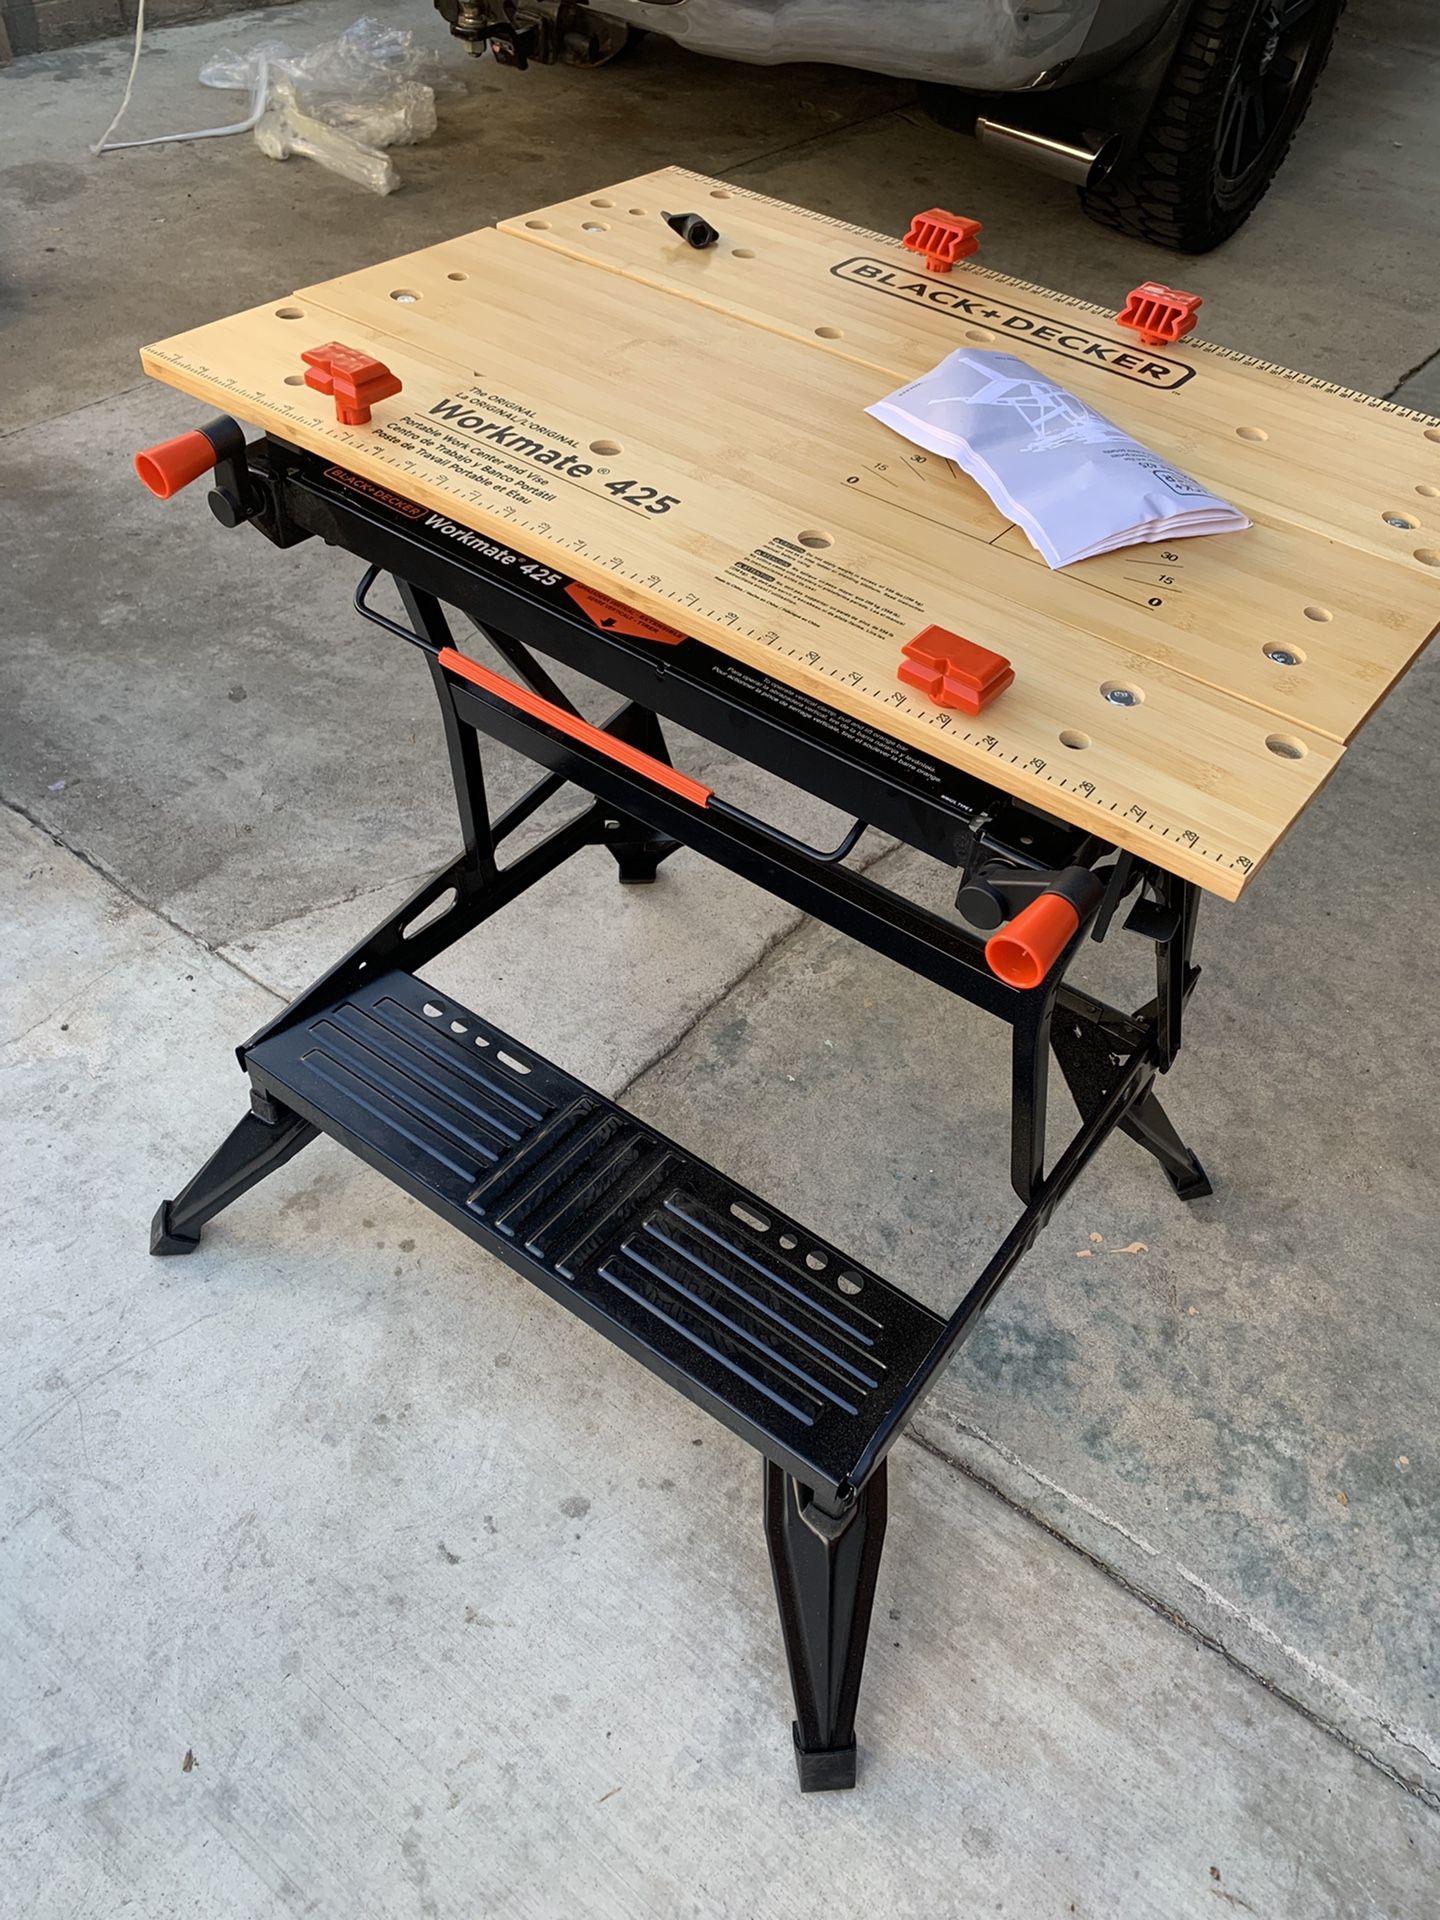 Black & Decker Workmate Plus Portable Workbench Holds up to 550 pounds  Model 79-042 for Sale in Fremont, CA - OfferUp